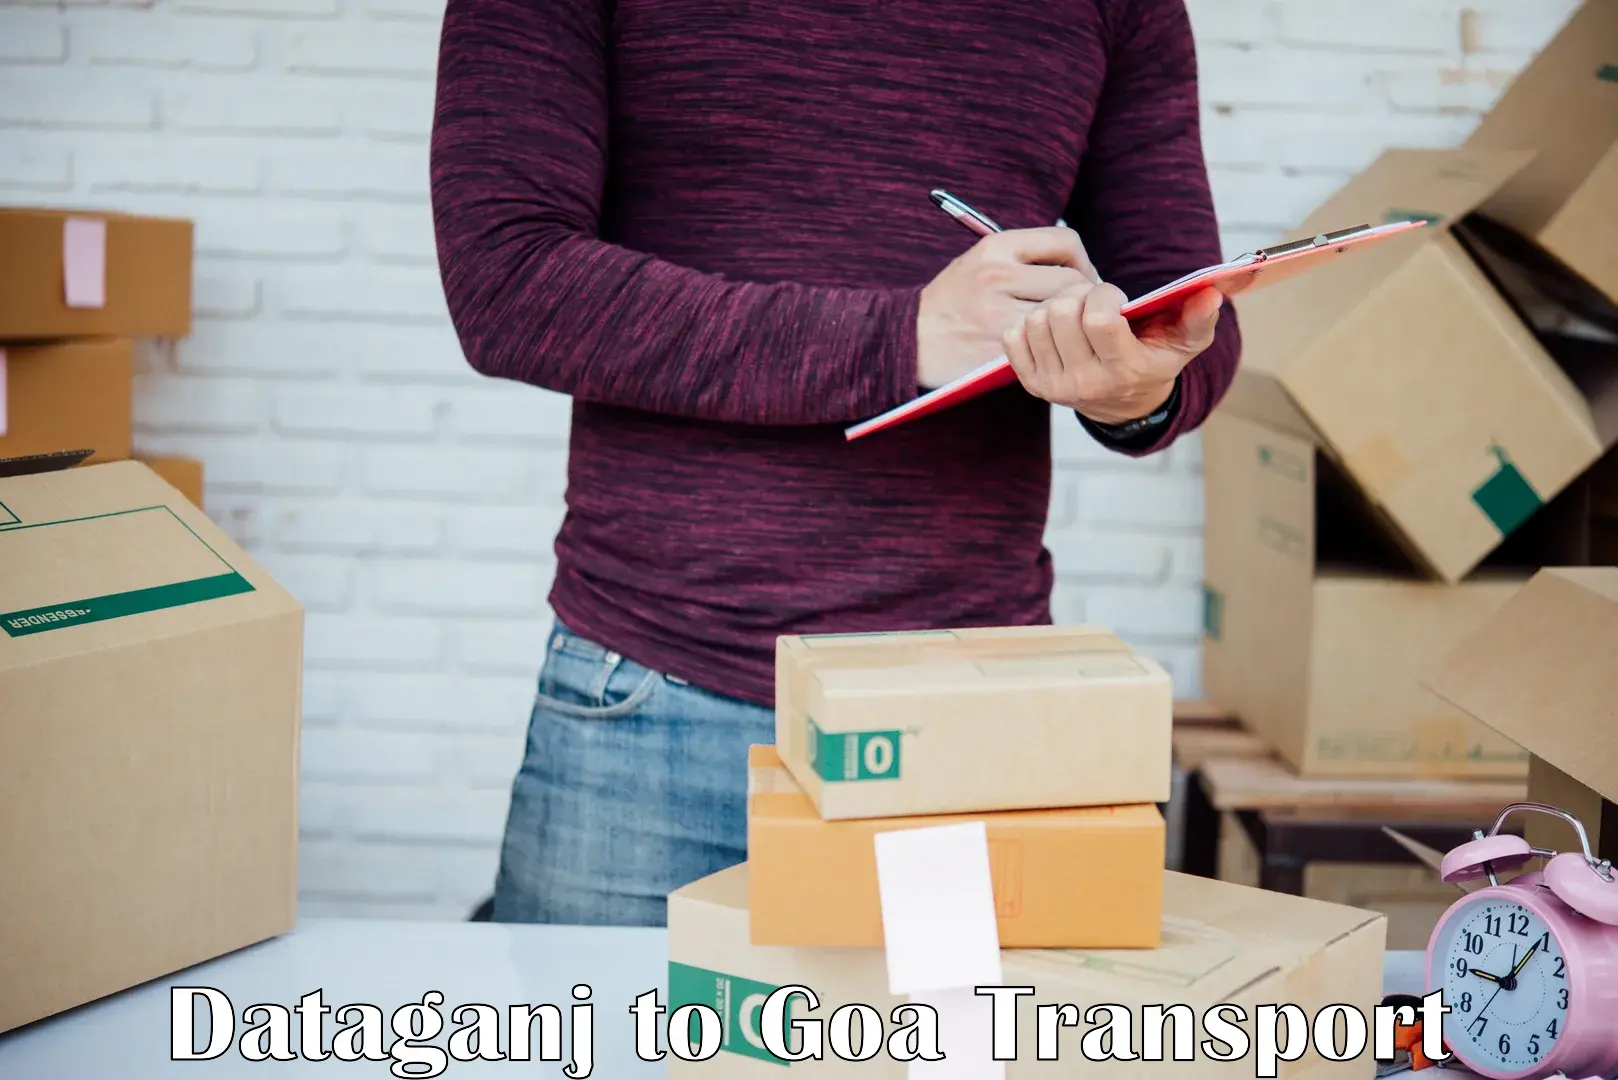 Container transport service Dataganj to Goa